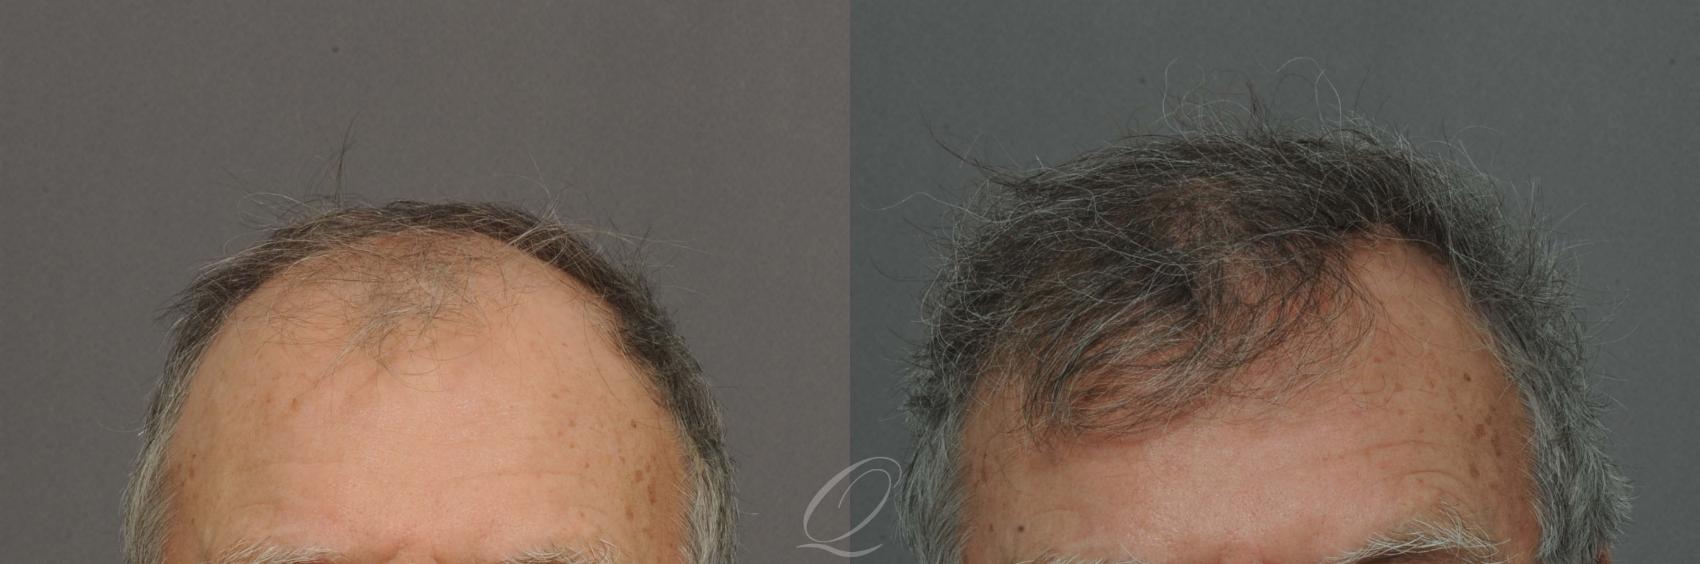 FUT Case 1026 Before & After View #1 | Rochester, Buffalo, & Syracuse, NY | Quatela Center for Hair Restoration